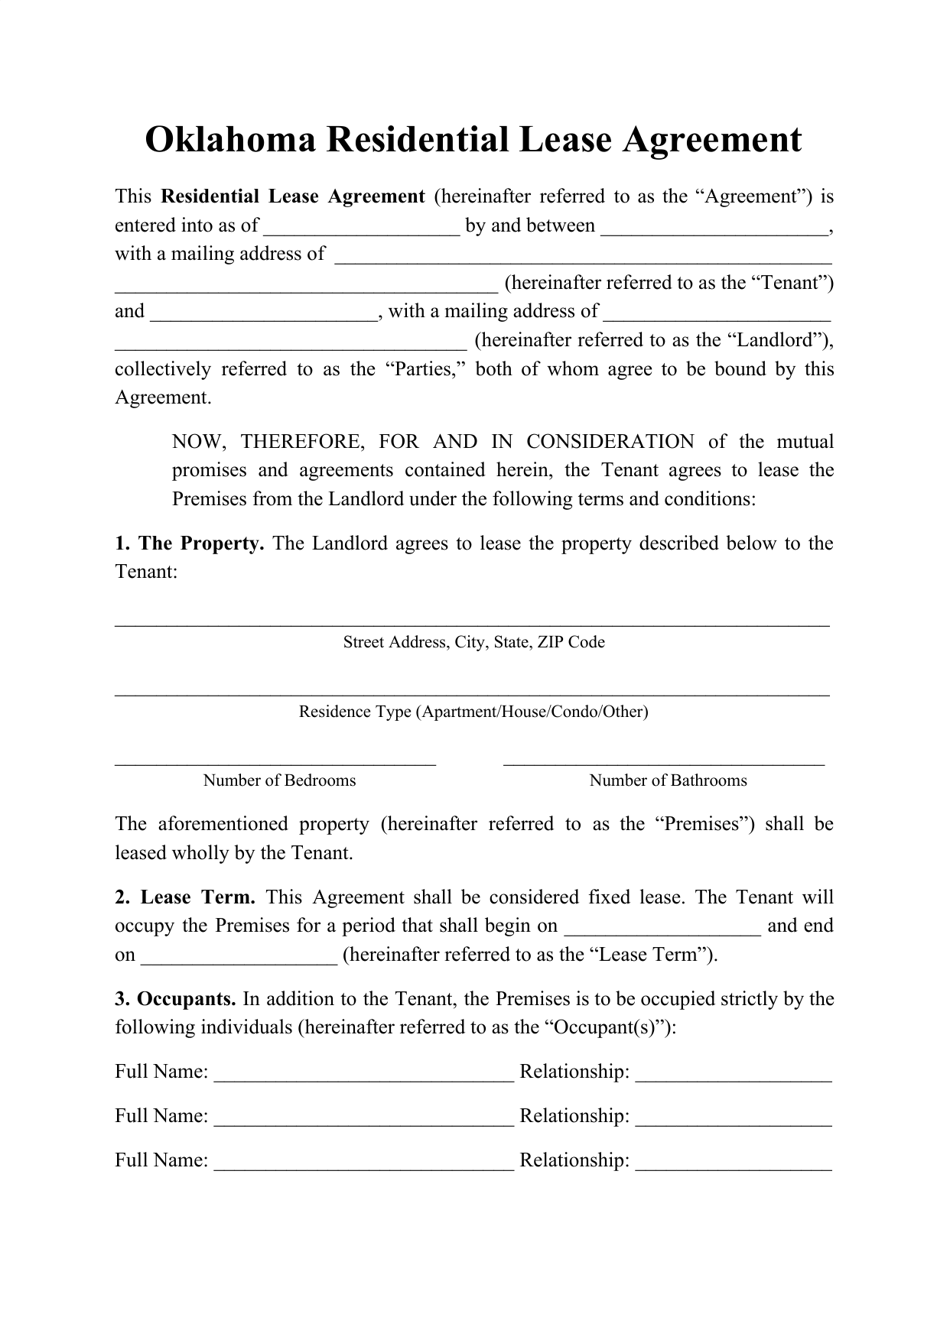 oklahoma residential lease agreement template download printable pdf